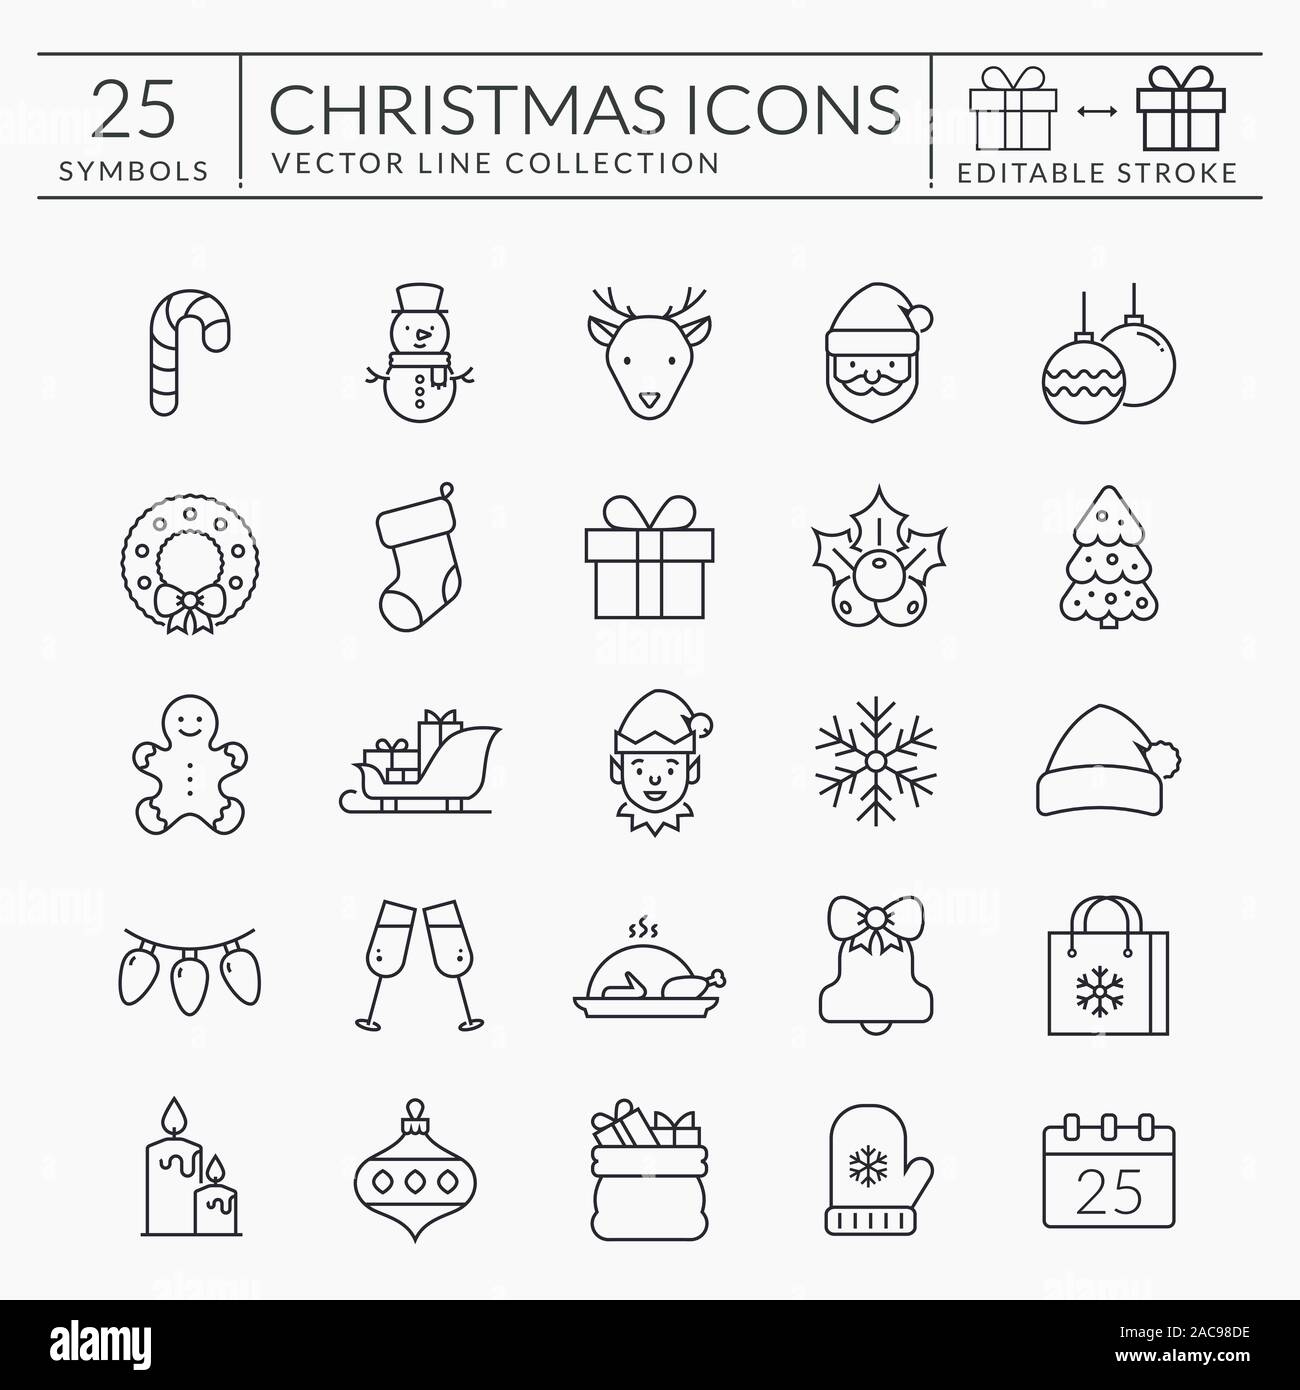 Christmas and New Year web icon set. Outline vector collection for winter holiday themes. Black symbols isolated on white background. Editable stroke. Stock Vector